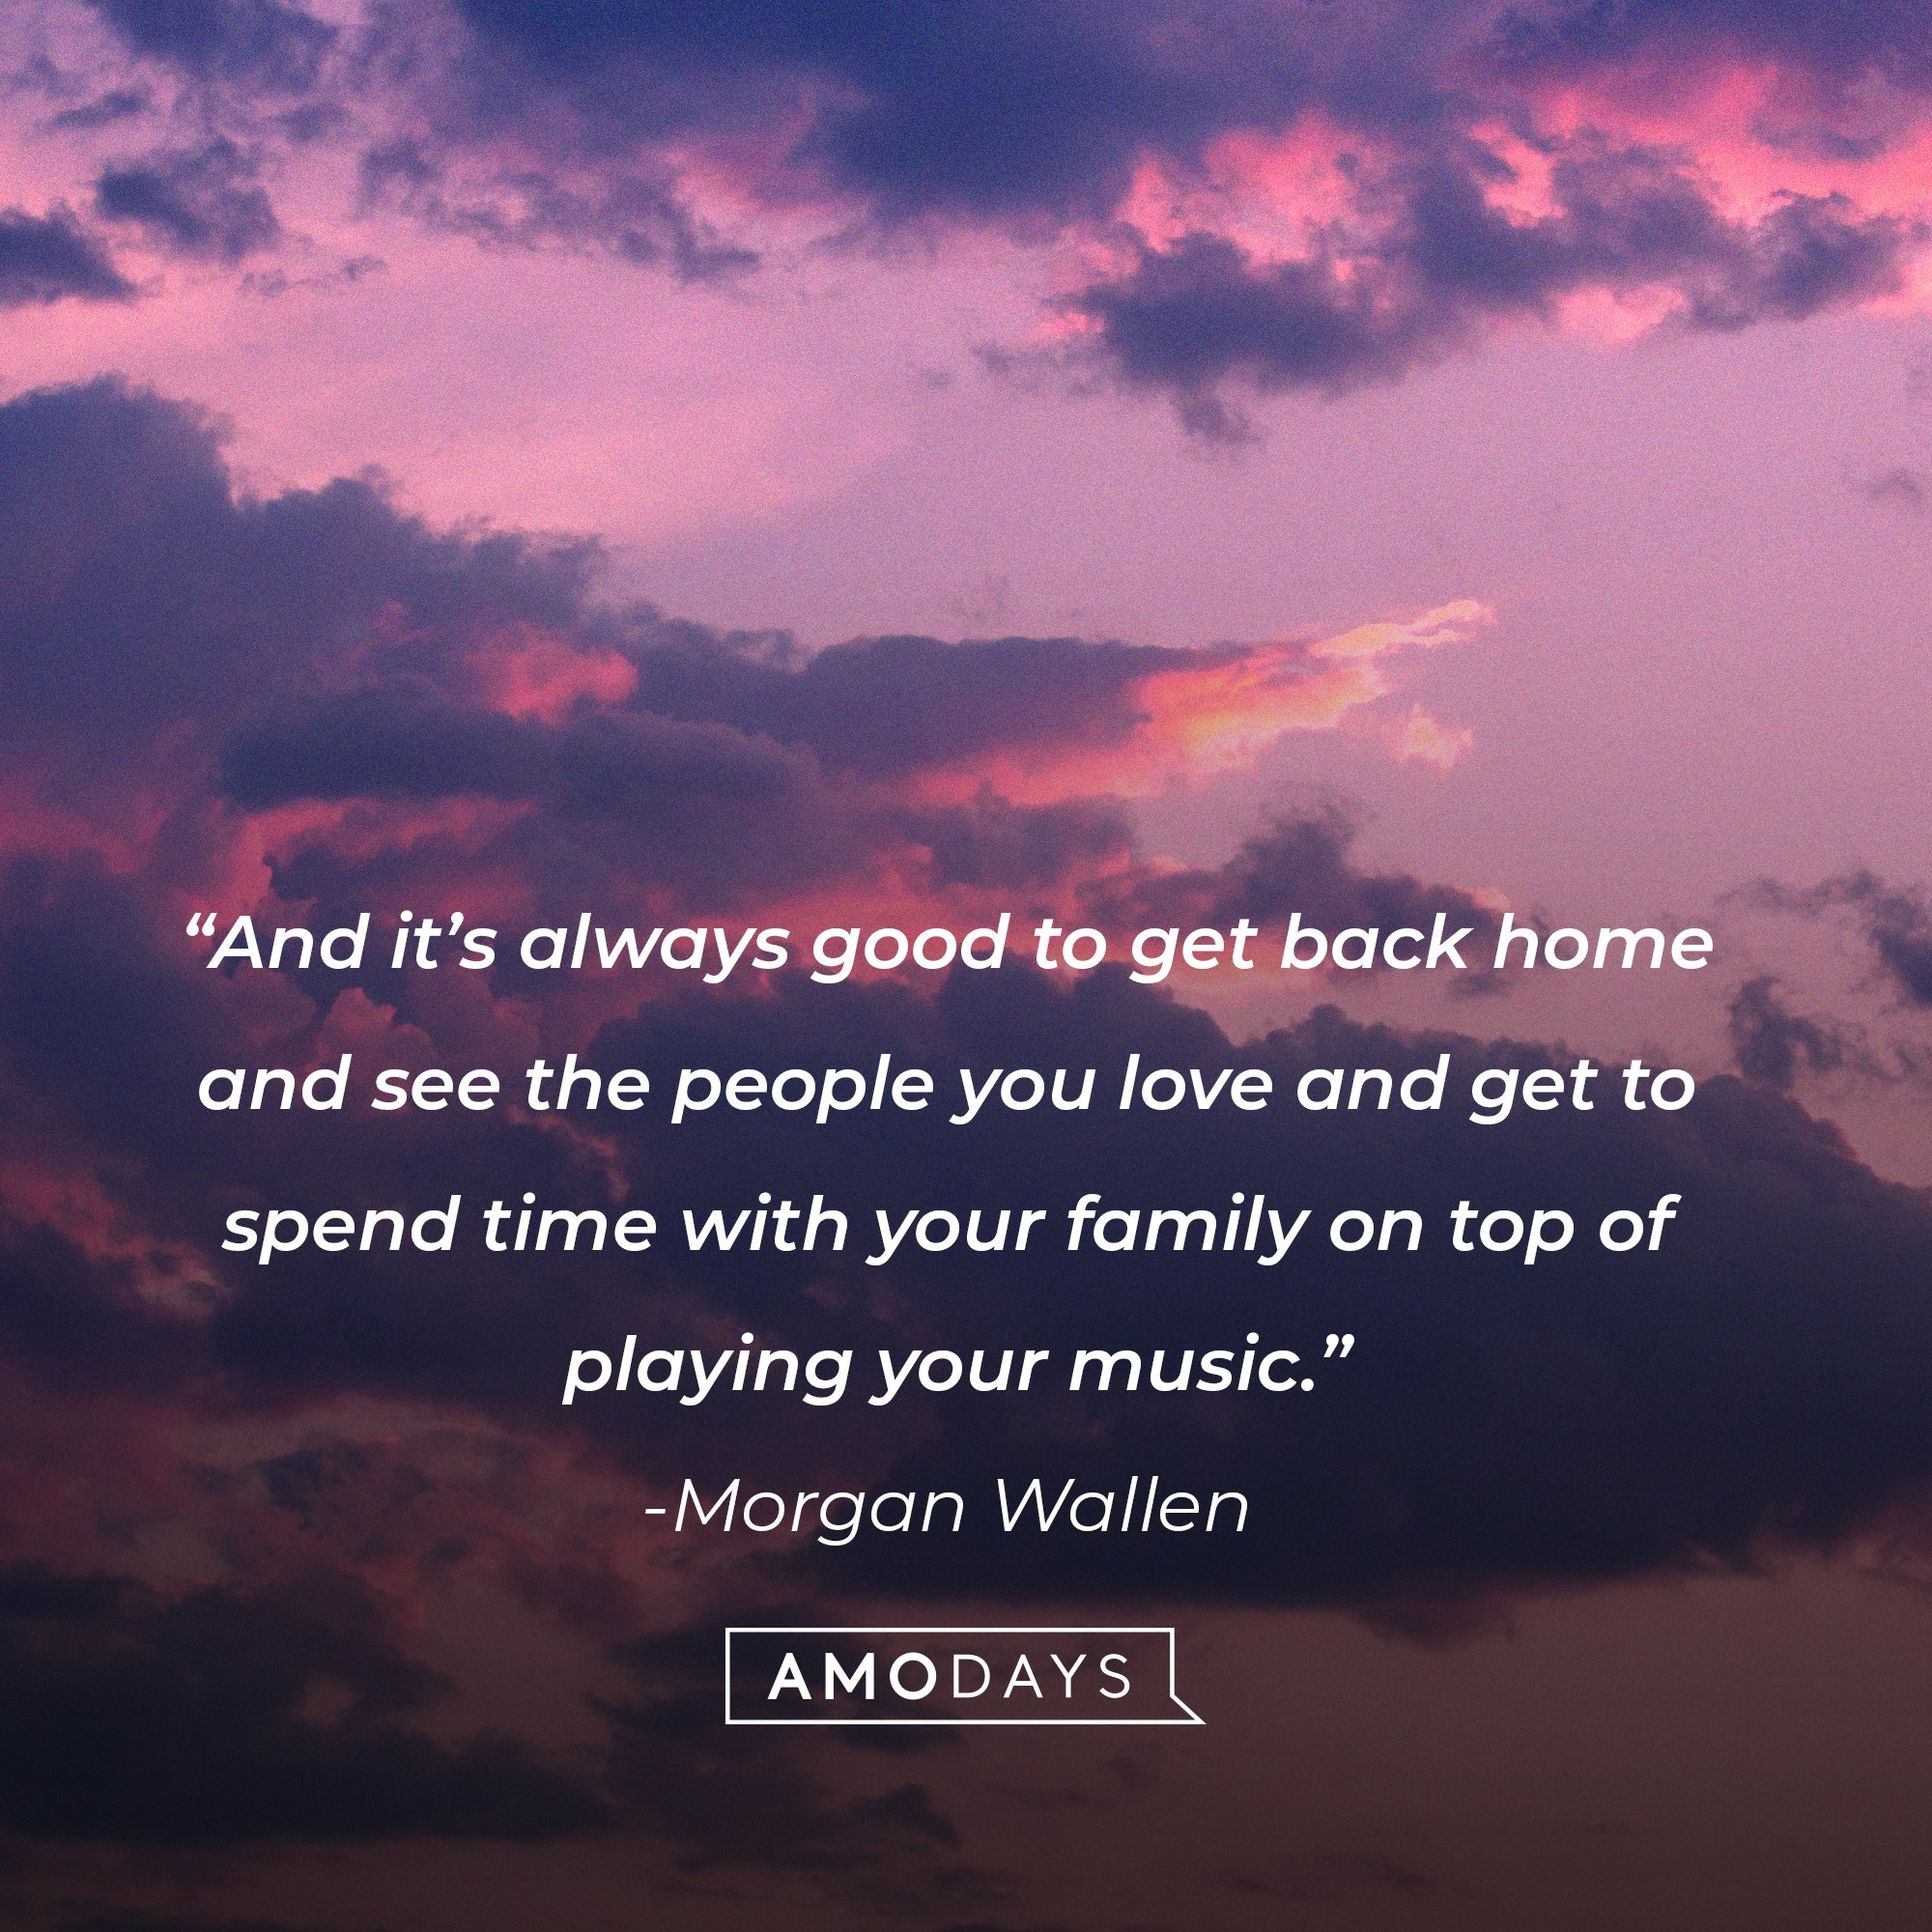  Morgan Wallen’s quote: “And it’s always good to get back home and see the people you love and get to spend time with your family on top of playing your music.” I Image: AmoDays